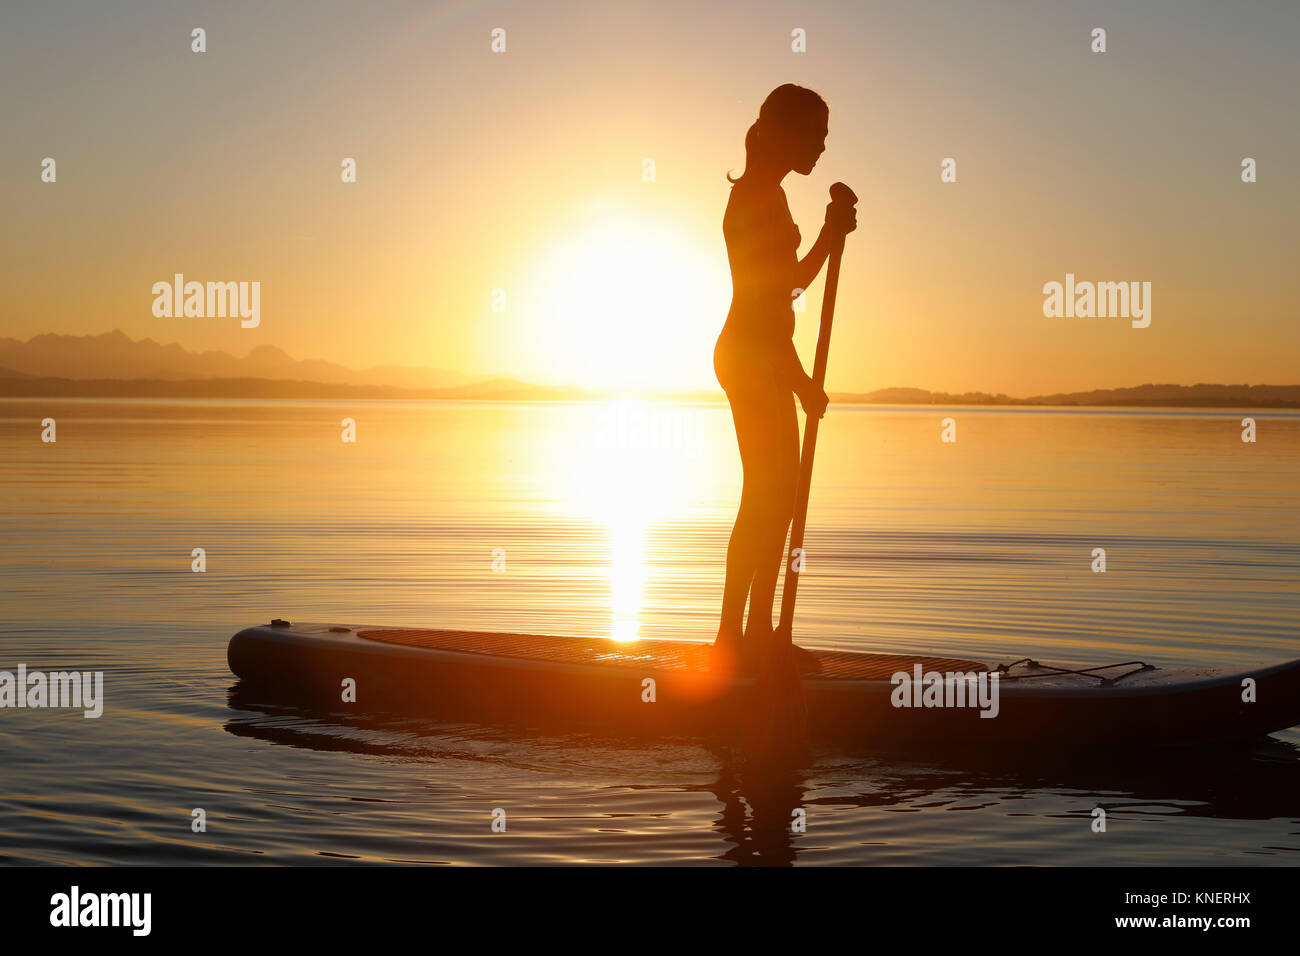 Young girl paddle boarding on water, at sunset Stock Photo